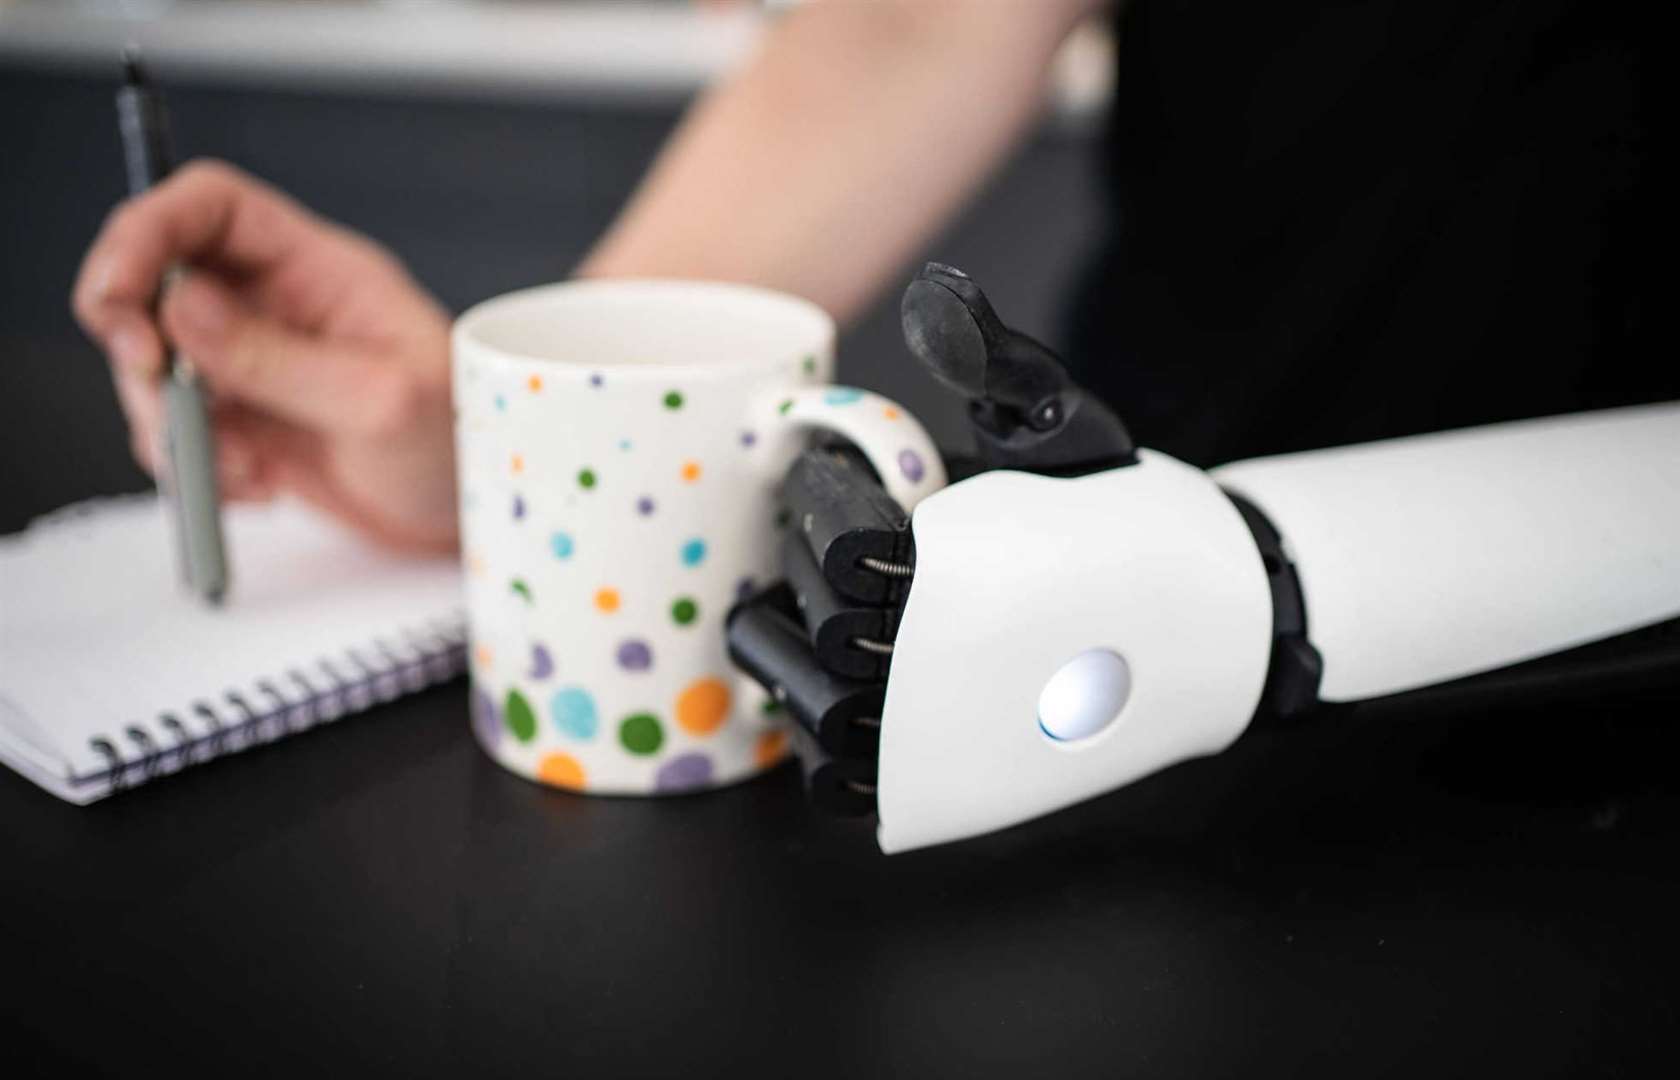 The Hero Arm is made by Bristol firm Open Bionics. Picture: Open Bionics